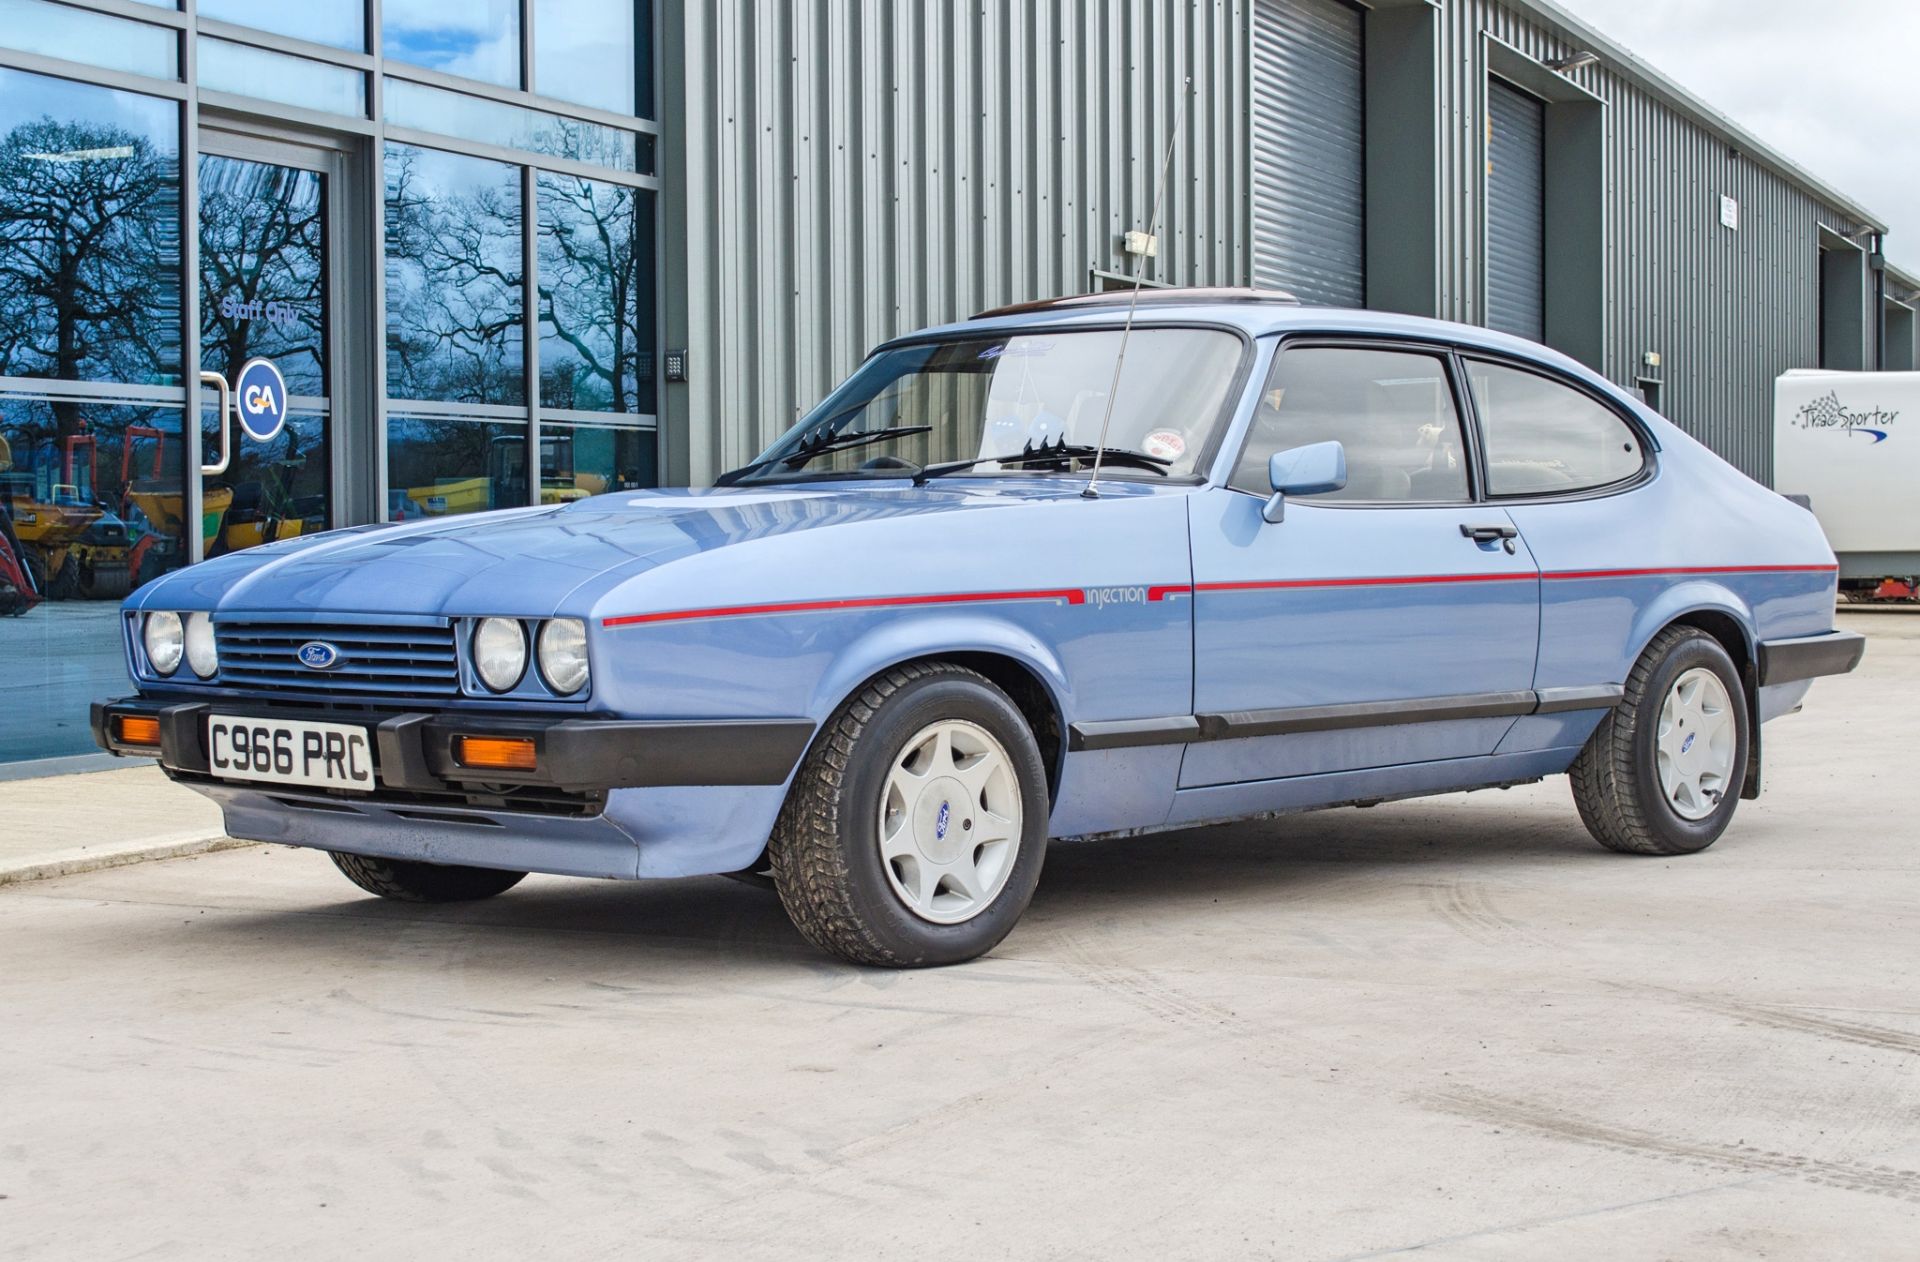 1986 Ford Capri 2.8 Injection Special 3 door coupe - Image 3 of 56